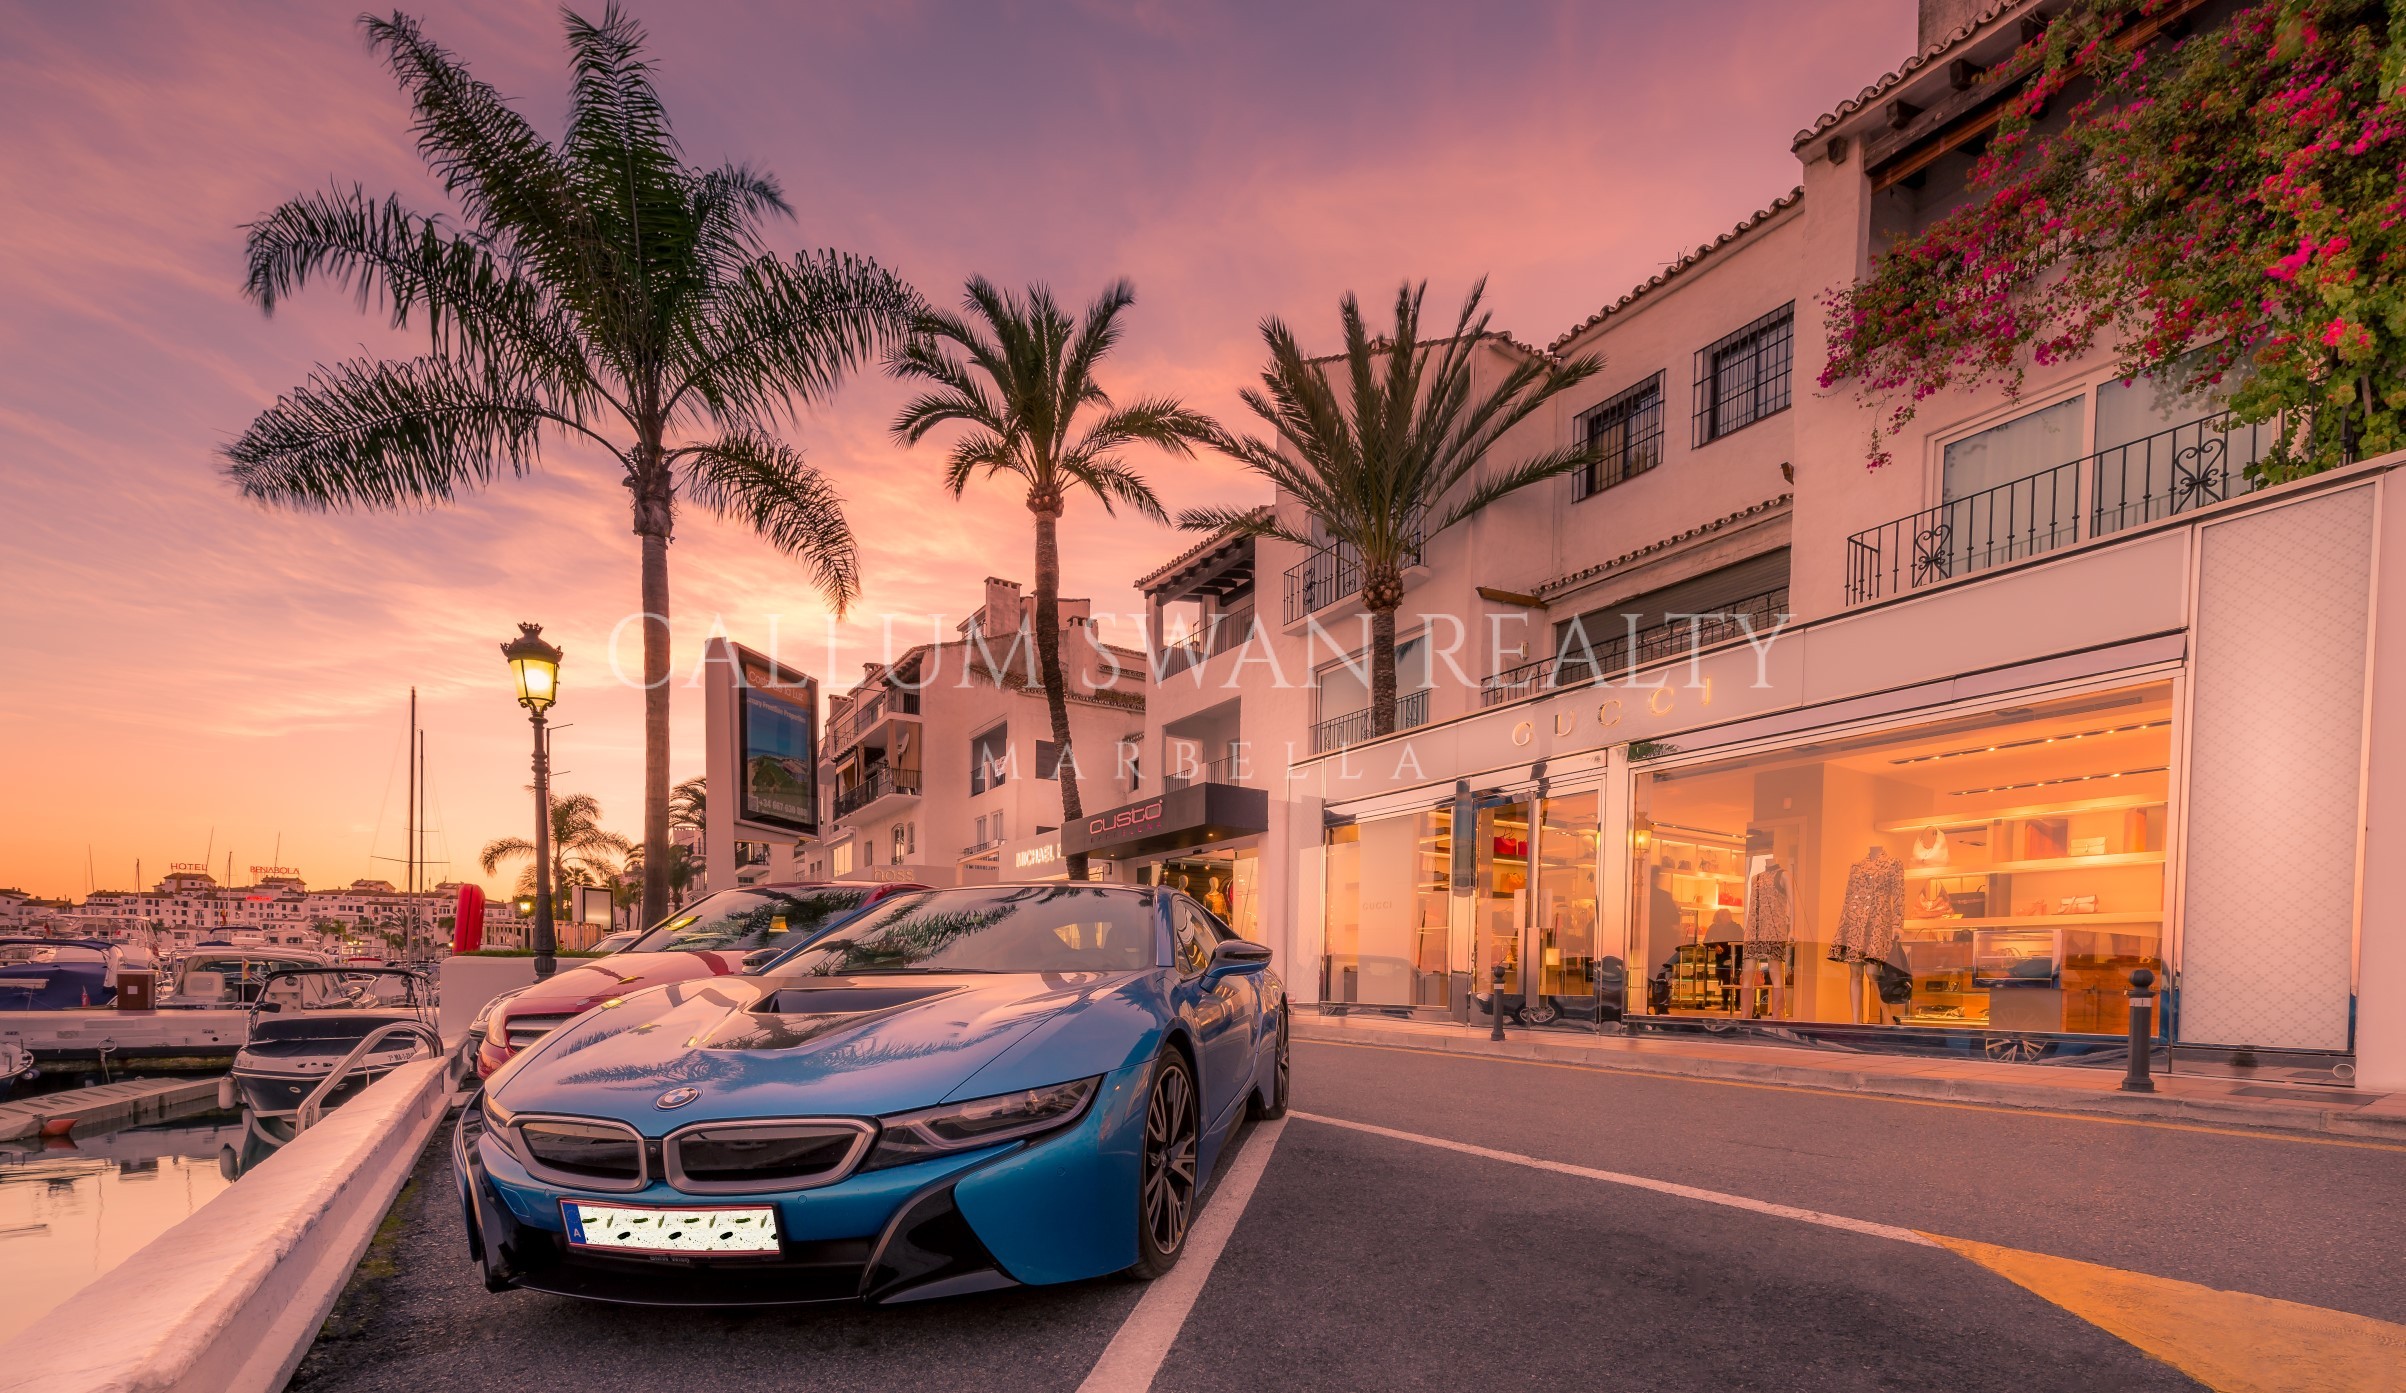 Puerto Banús: Luxury shopping with sea views